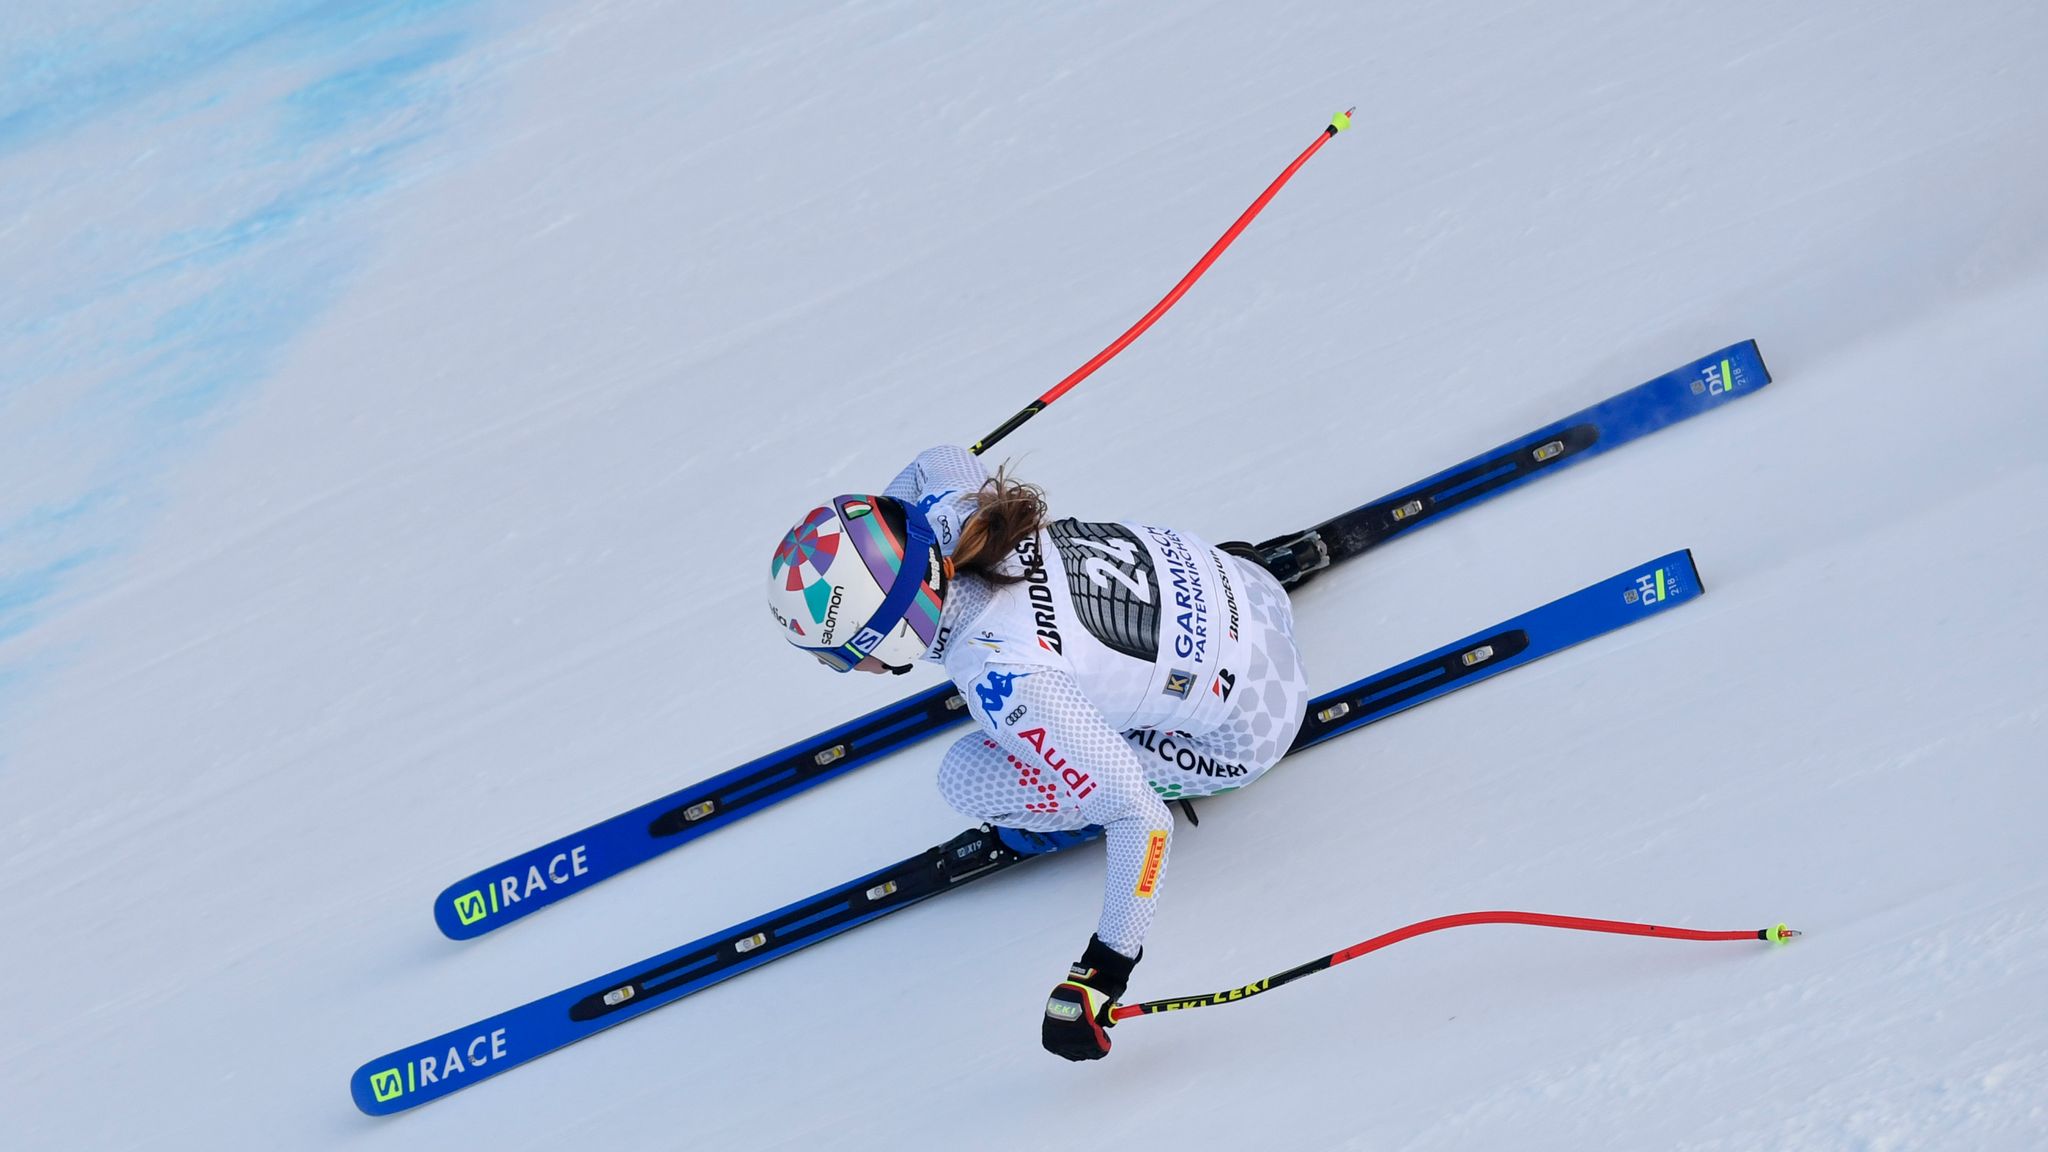 Marta Bassino shines in Super-G skiing World Cup in Germany News Sky Sports